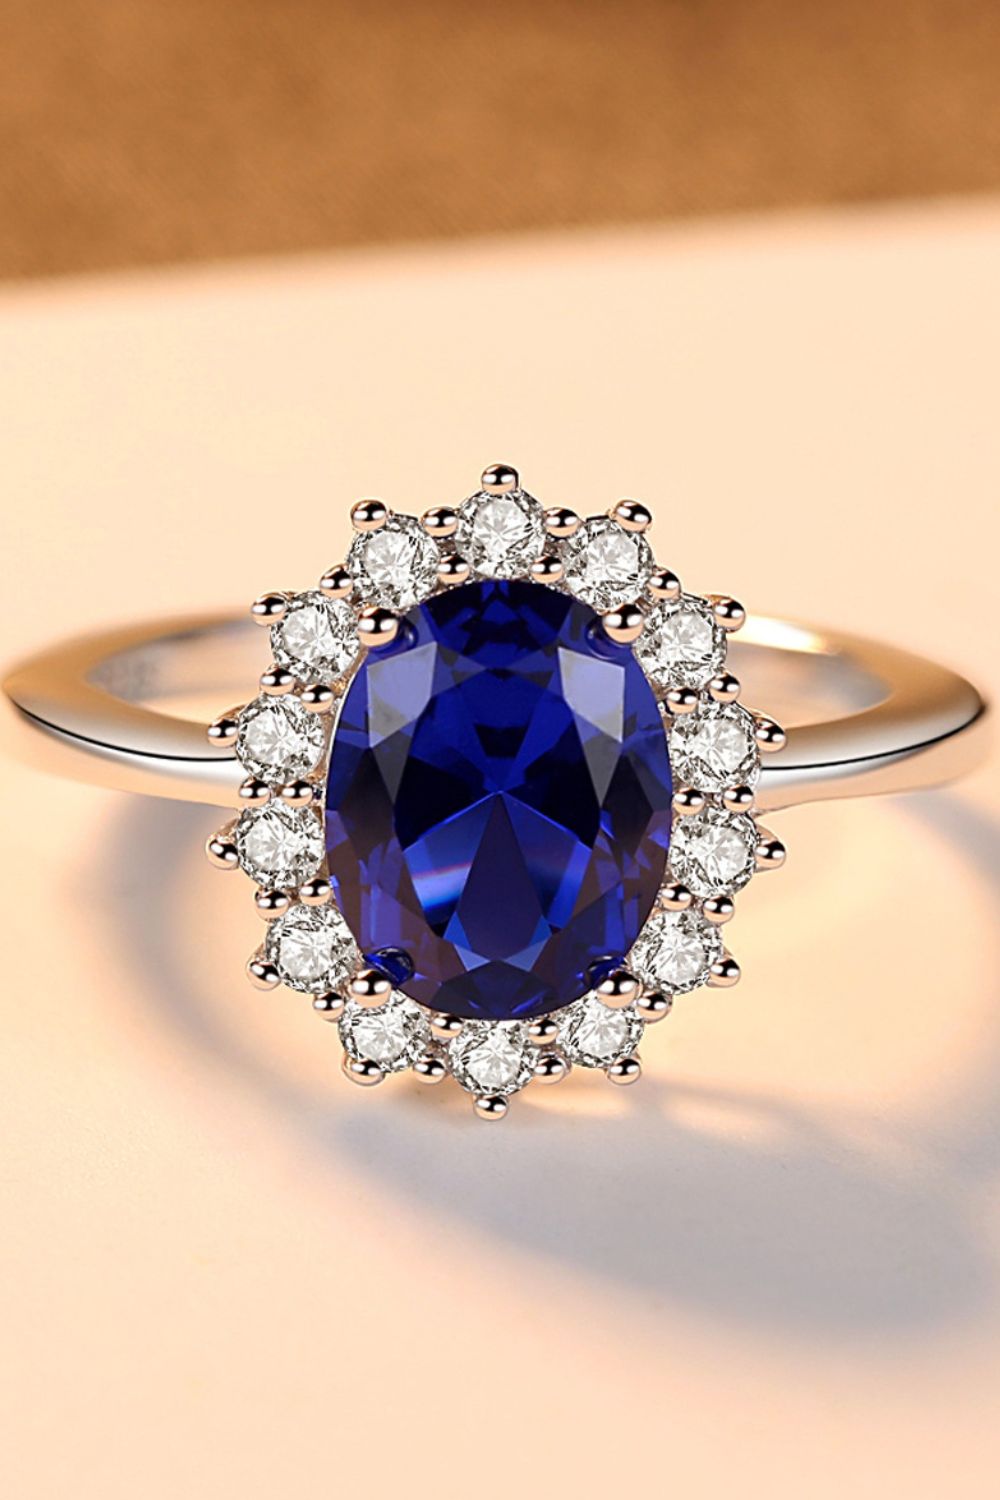 Synthetic Sapphire 925 Sterling Silver Ring - Rings - FITGGINS